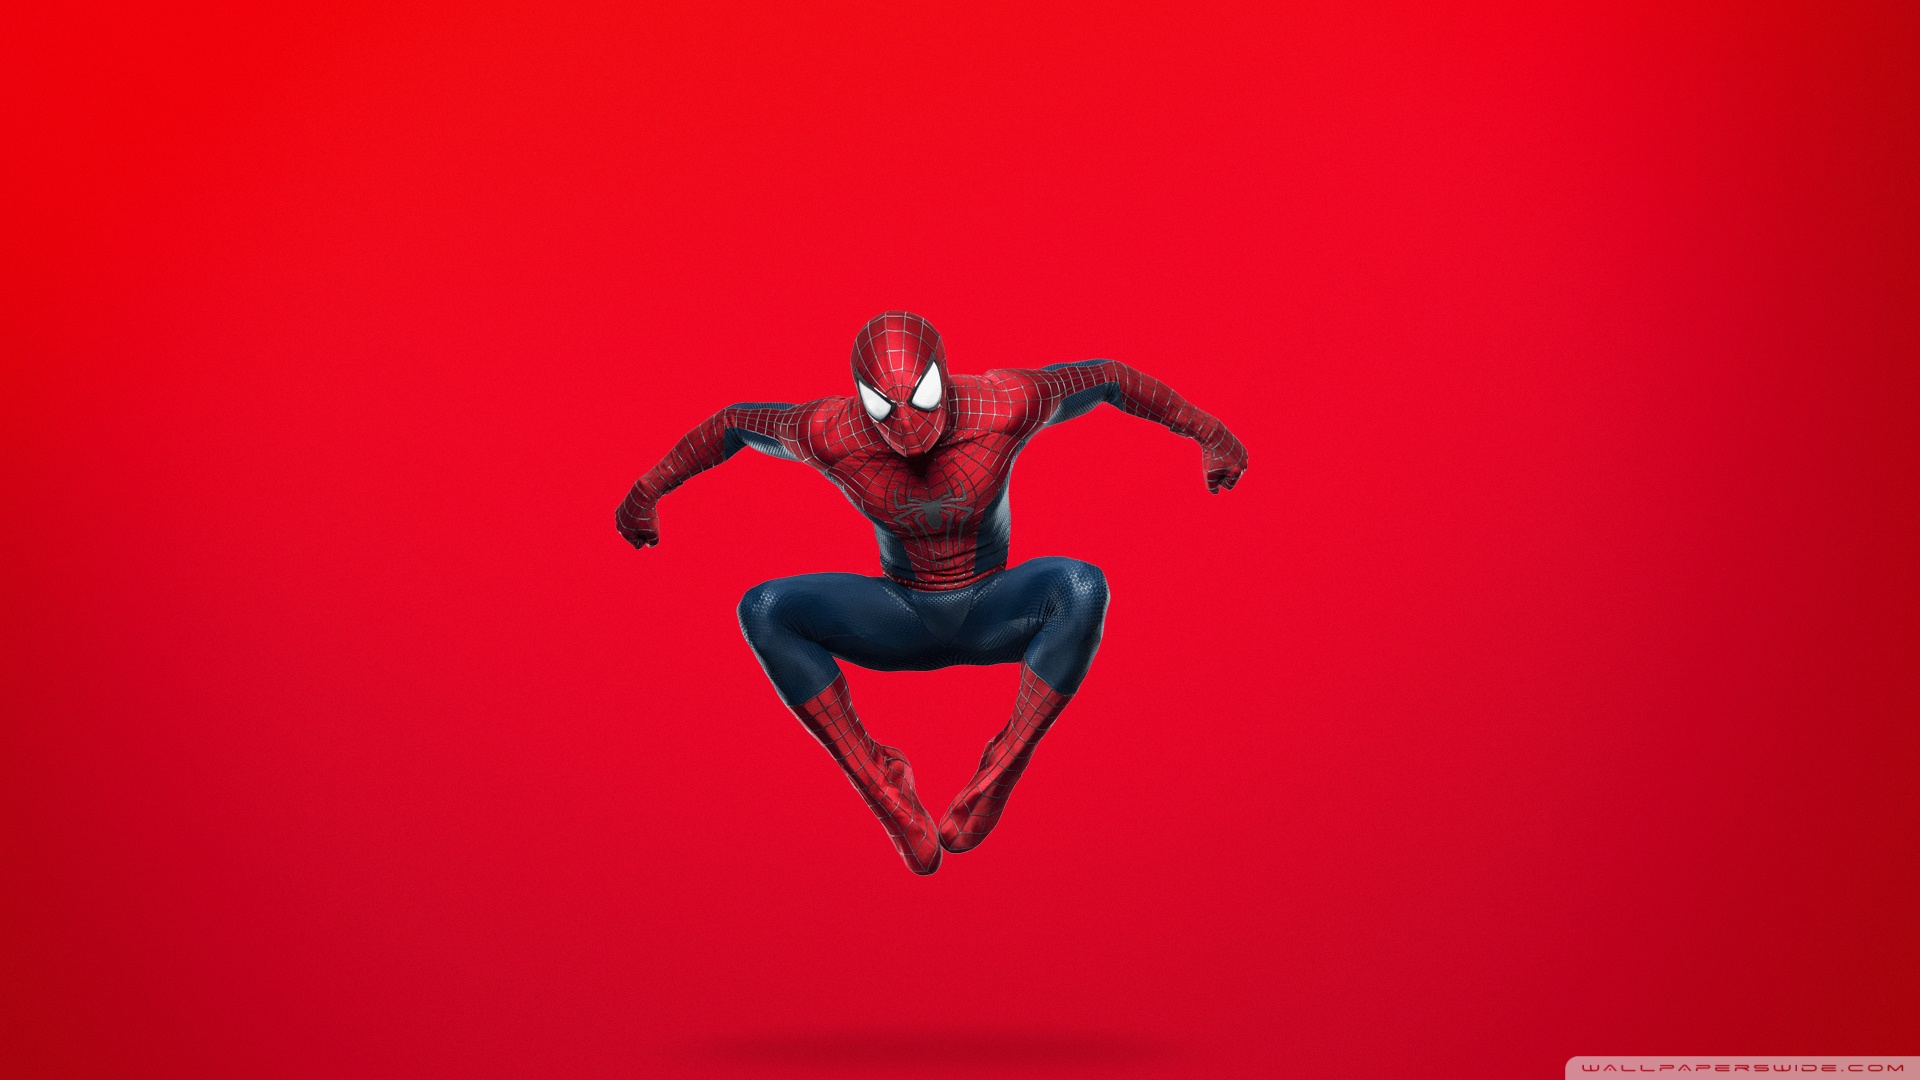 Spider Man Jumping (Red Background) Wallpaper Full HD [1920x1080 ...